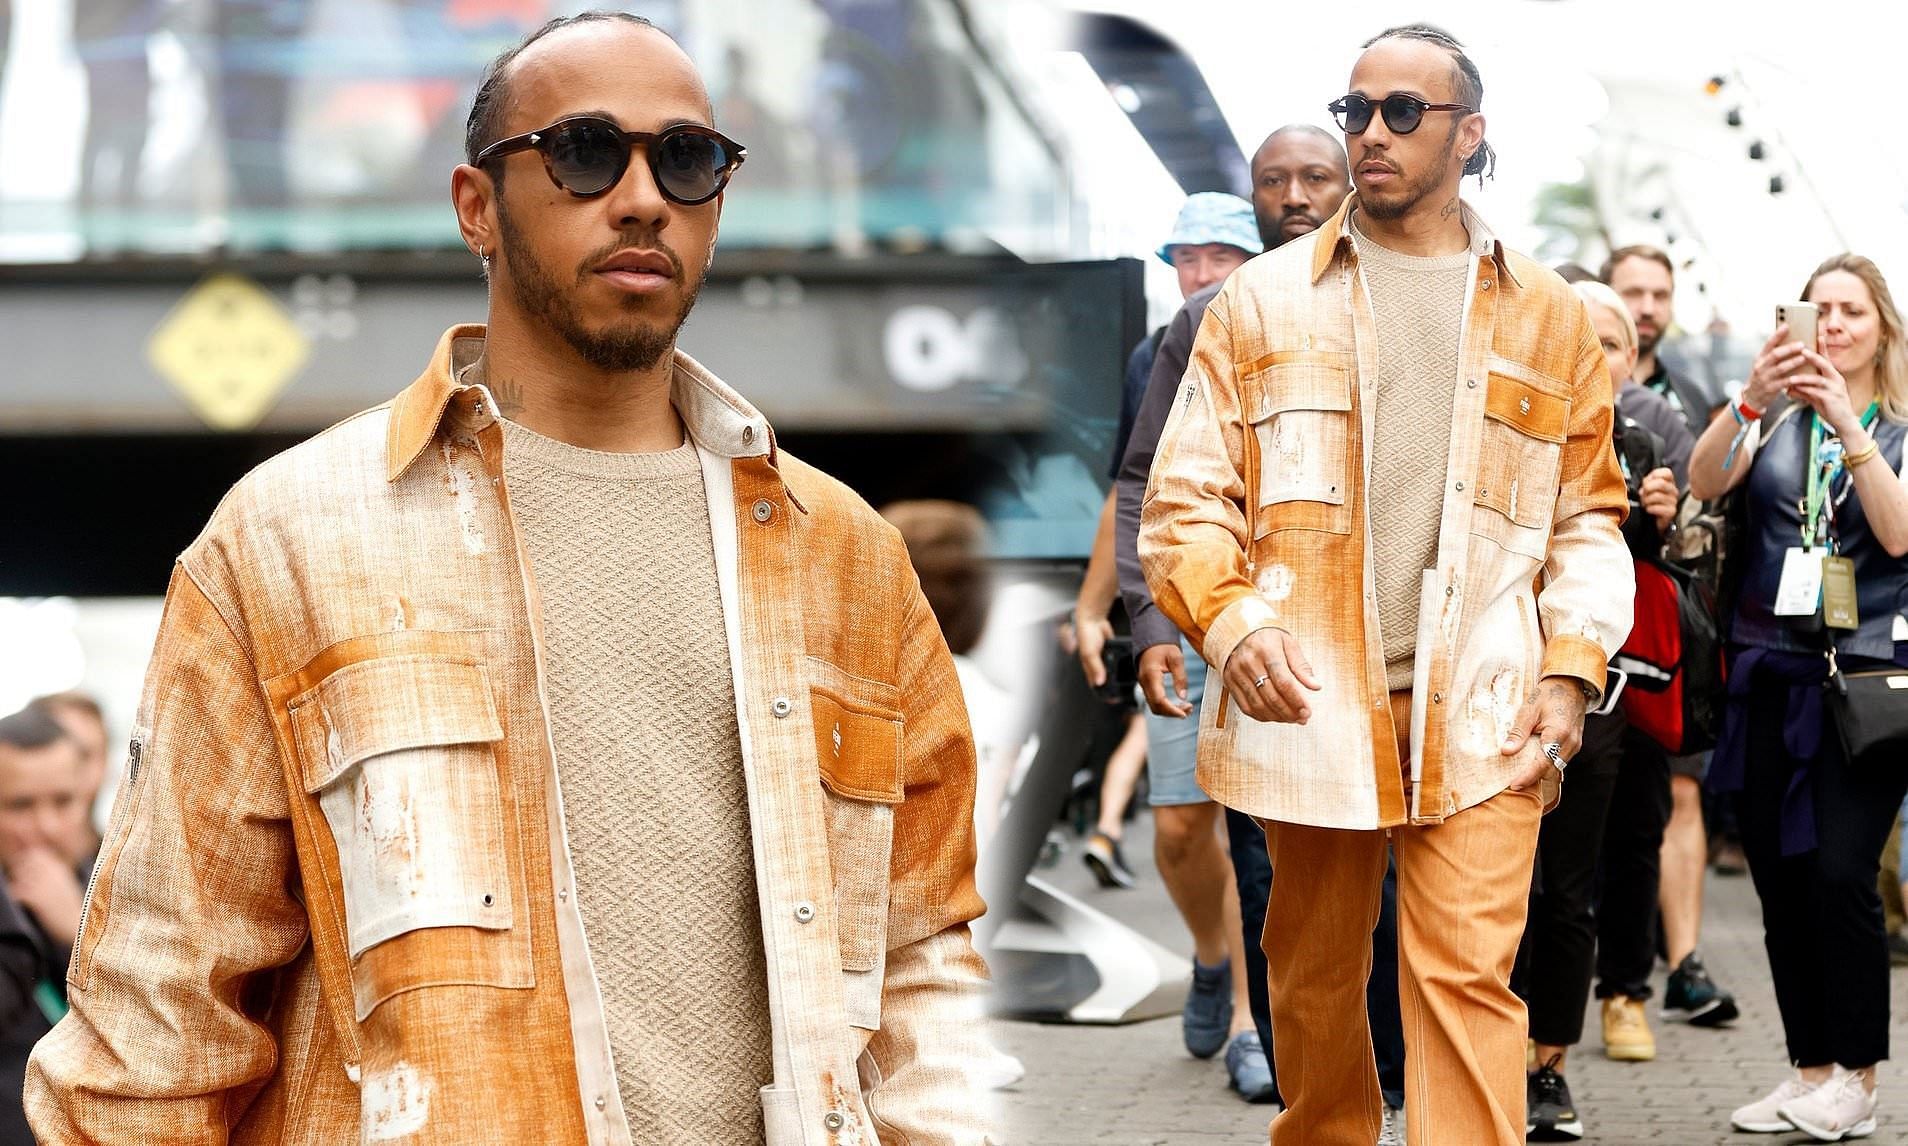 Lewis Hamilton is one of the most stylish drivers in the paddock